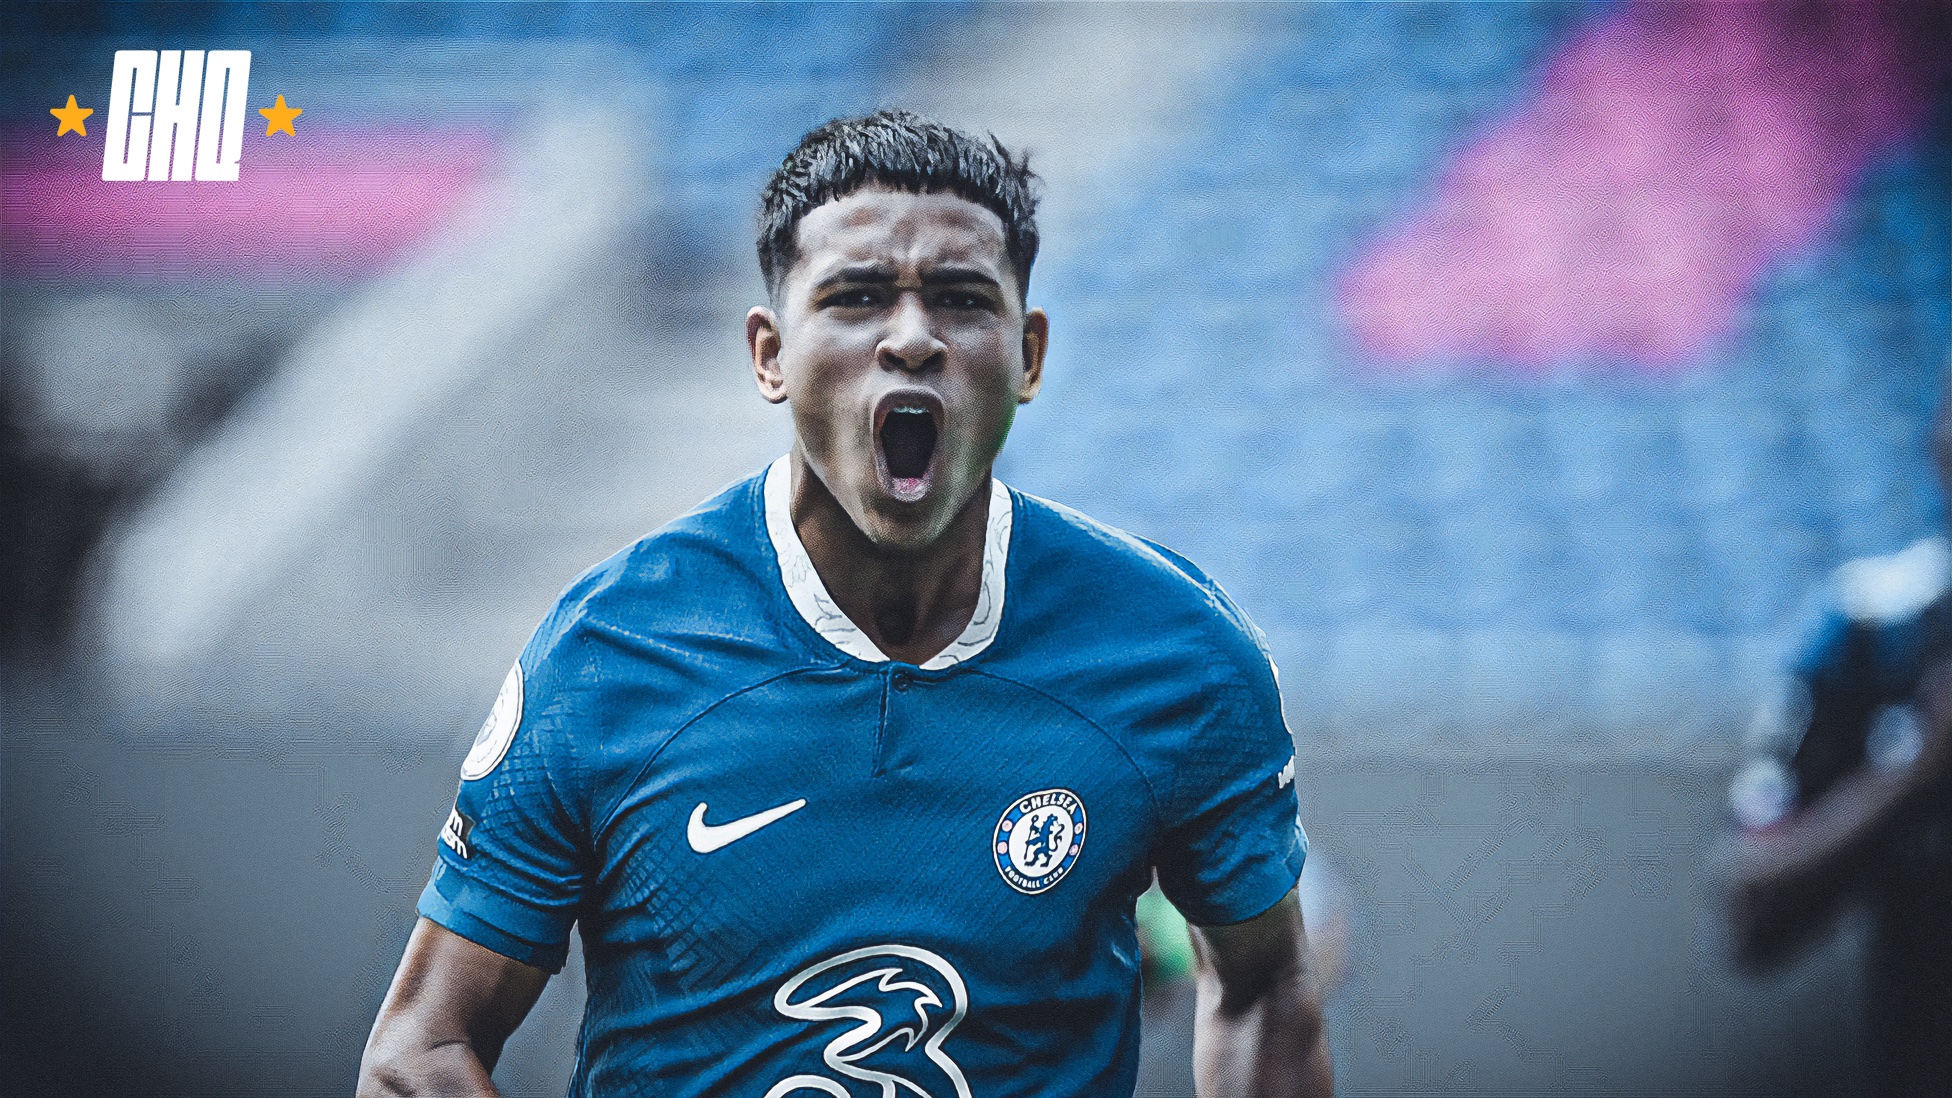 Chels HQ on X: "✨ "Remember the name!" Kendry Paez could be #Chelsea's next wonderkid signing, according to @FabrizioRomano. 🇪🇨 https://t.co/ssDCy9QJqD" / X